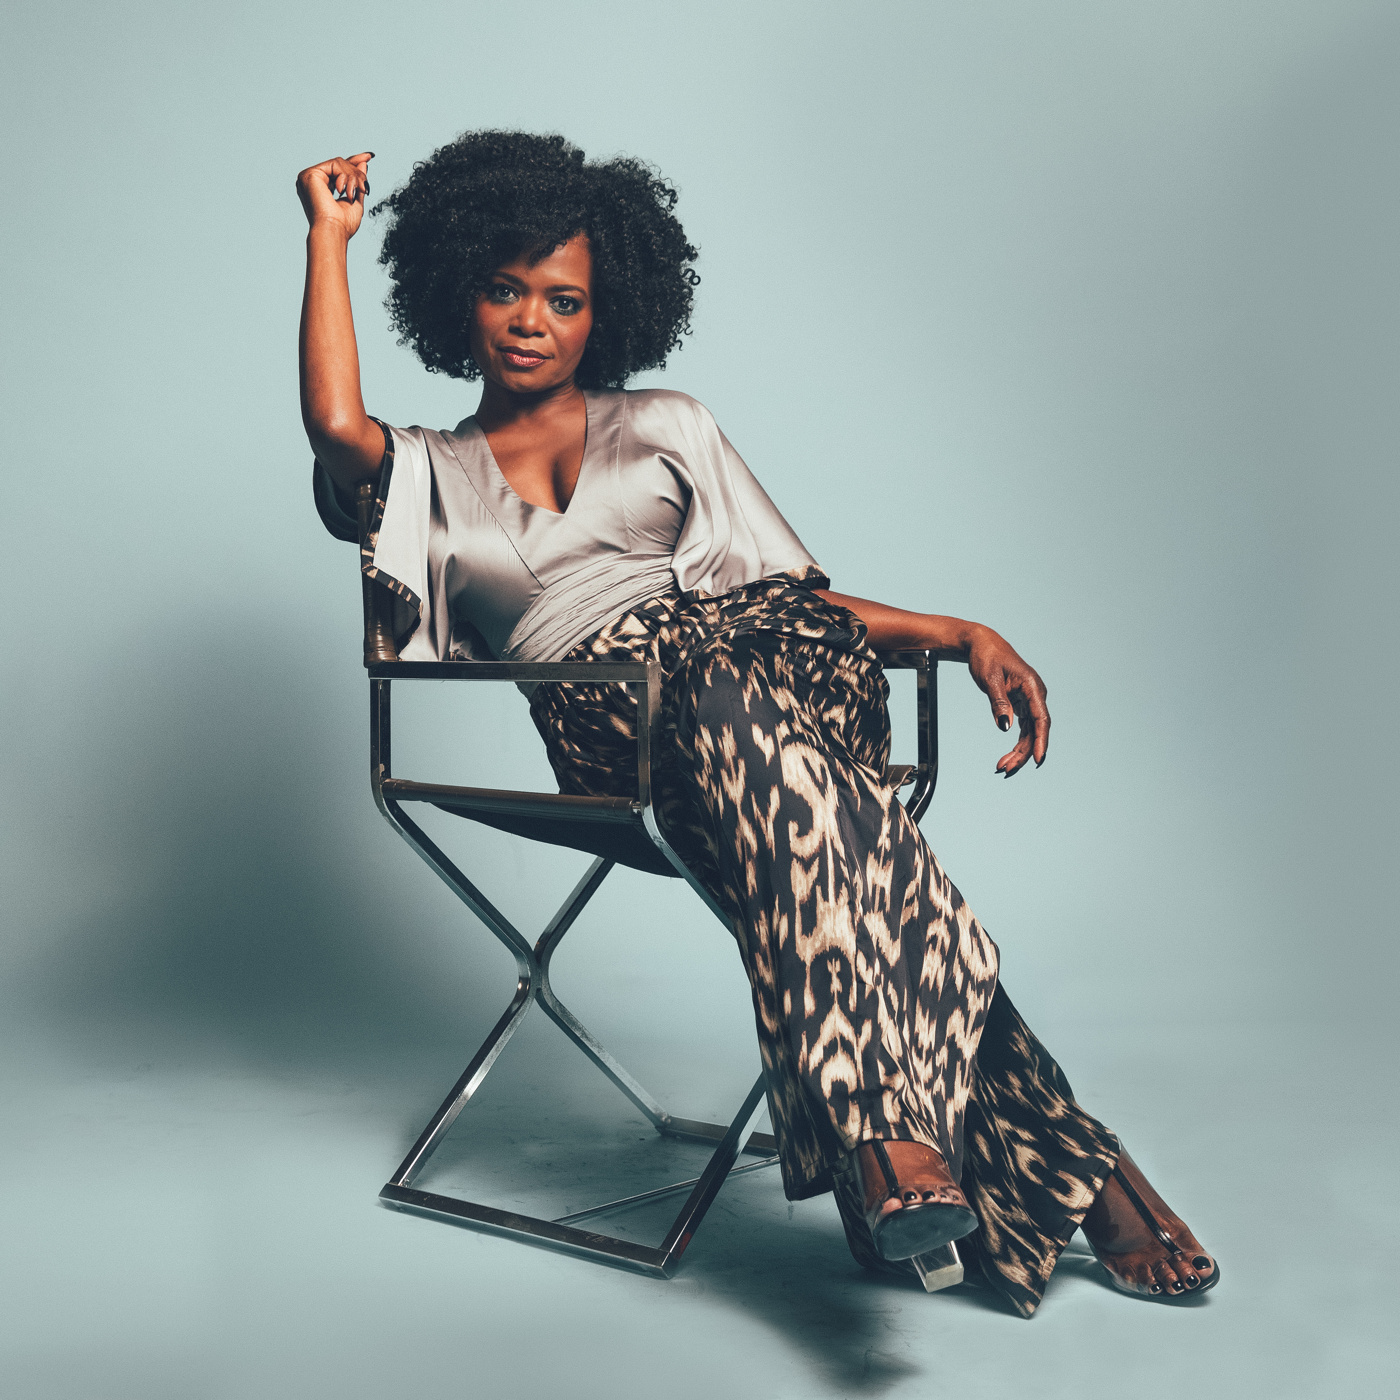 LaChanze Embraces Her Diva Side In Summer The Donna Musical.